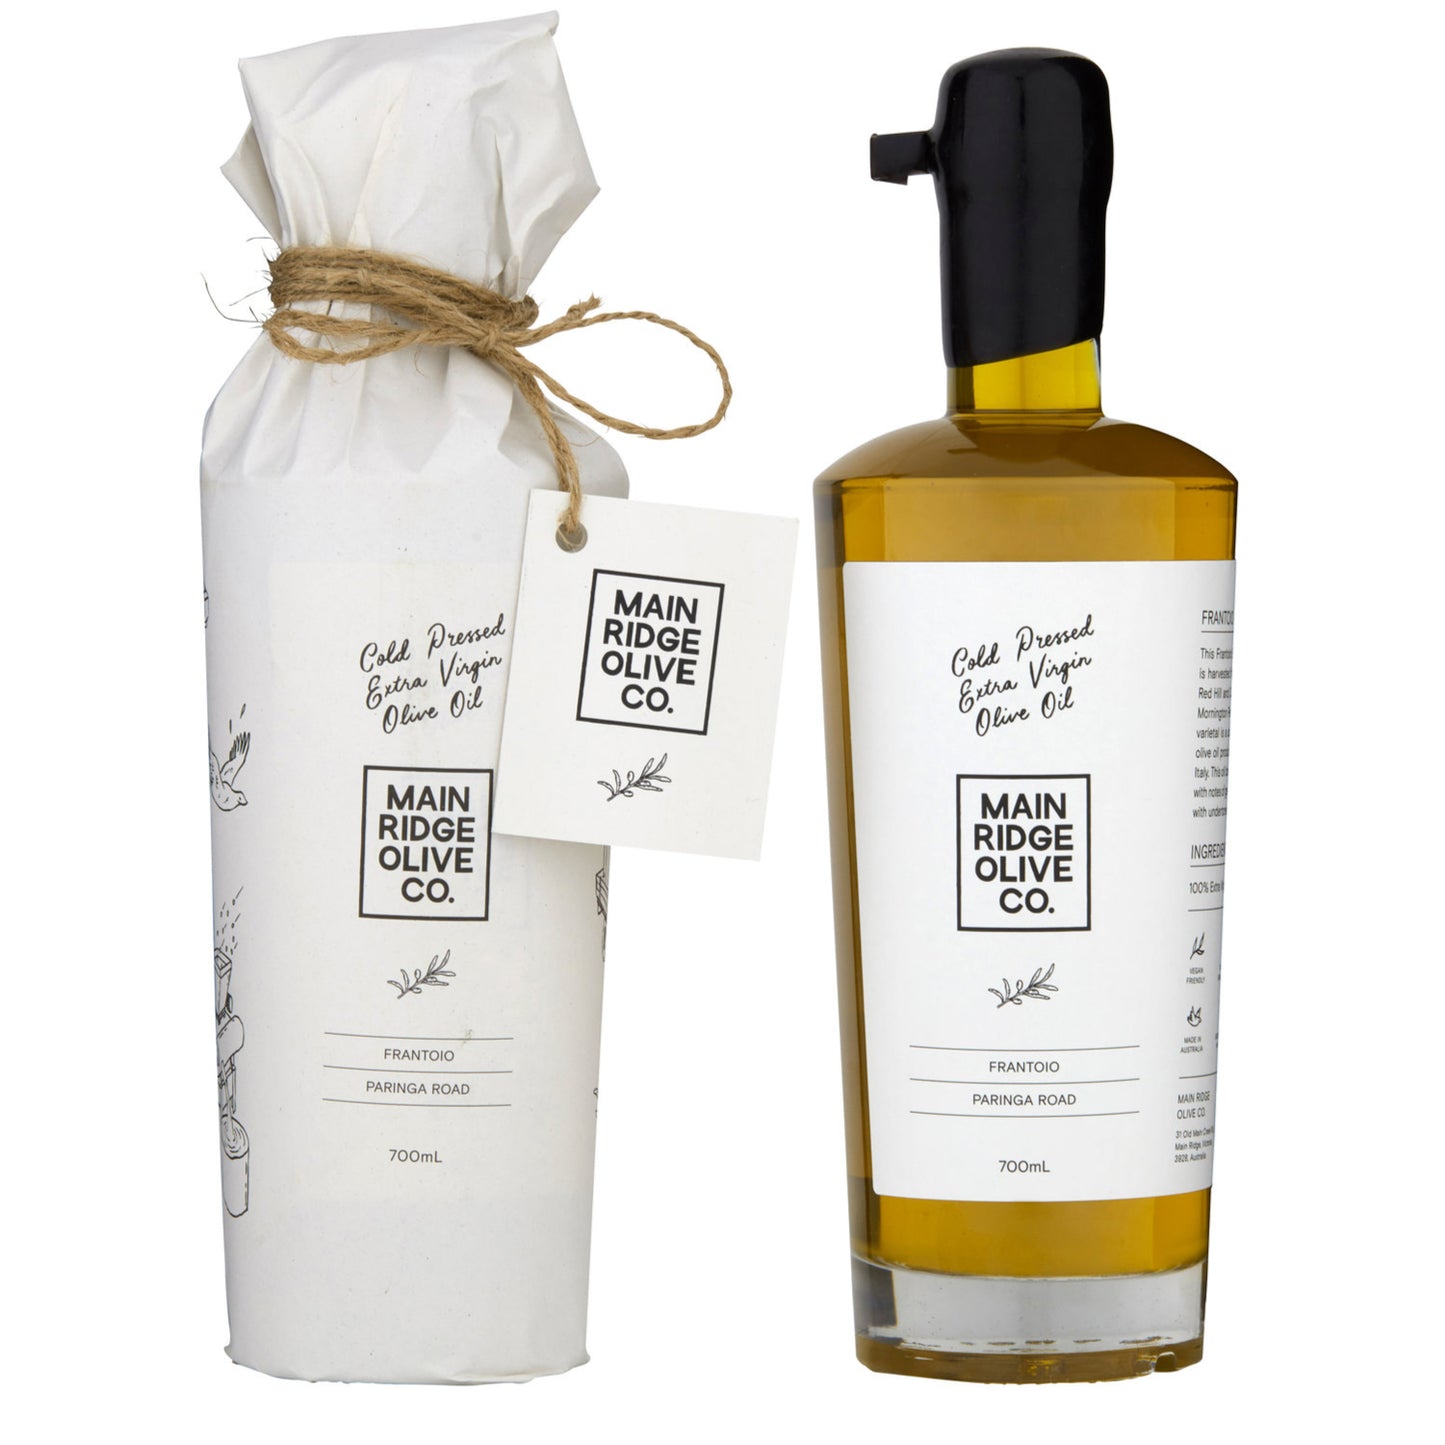 Gift Wrapped Extra Virgin Olive Oil - 700ML